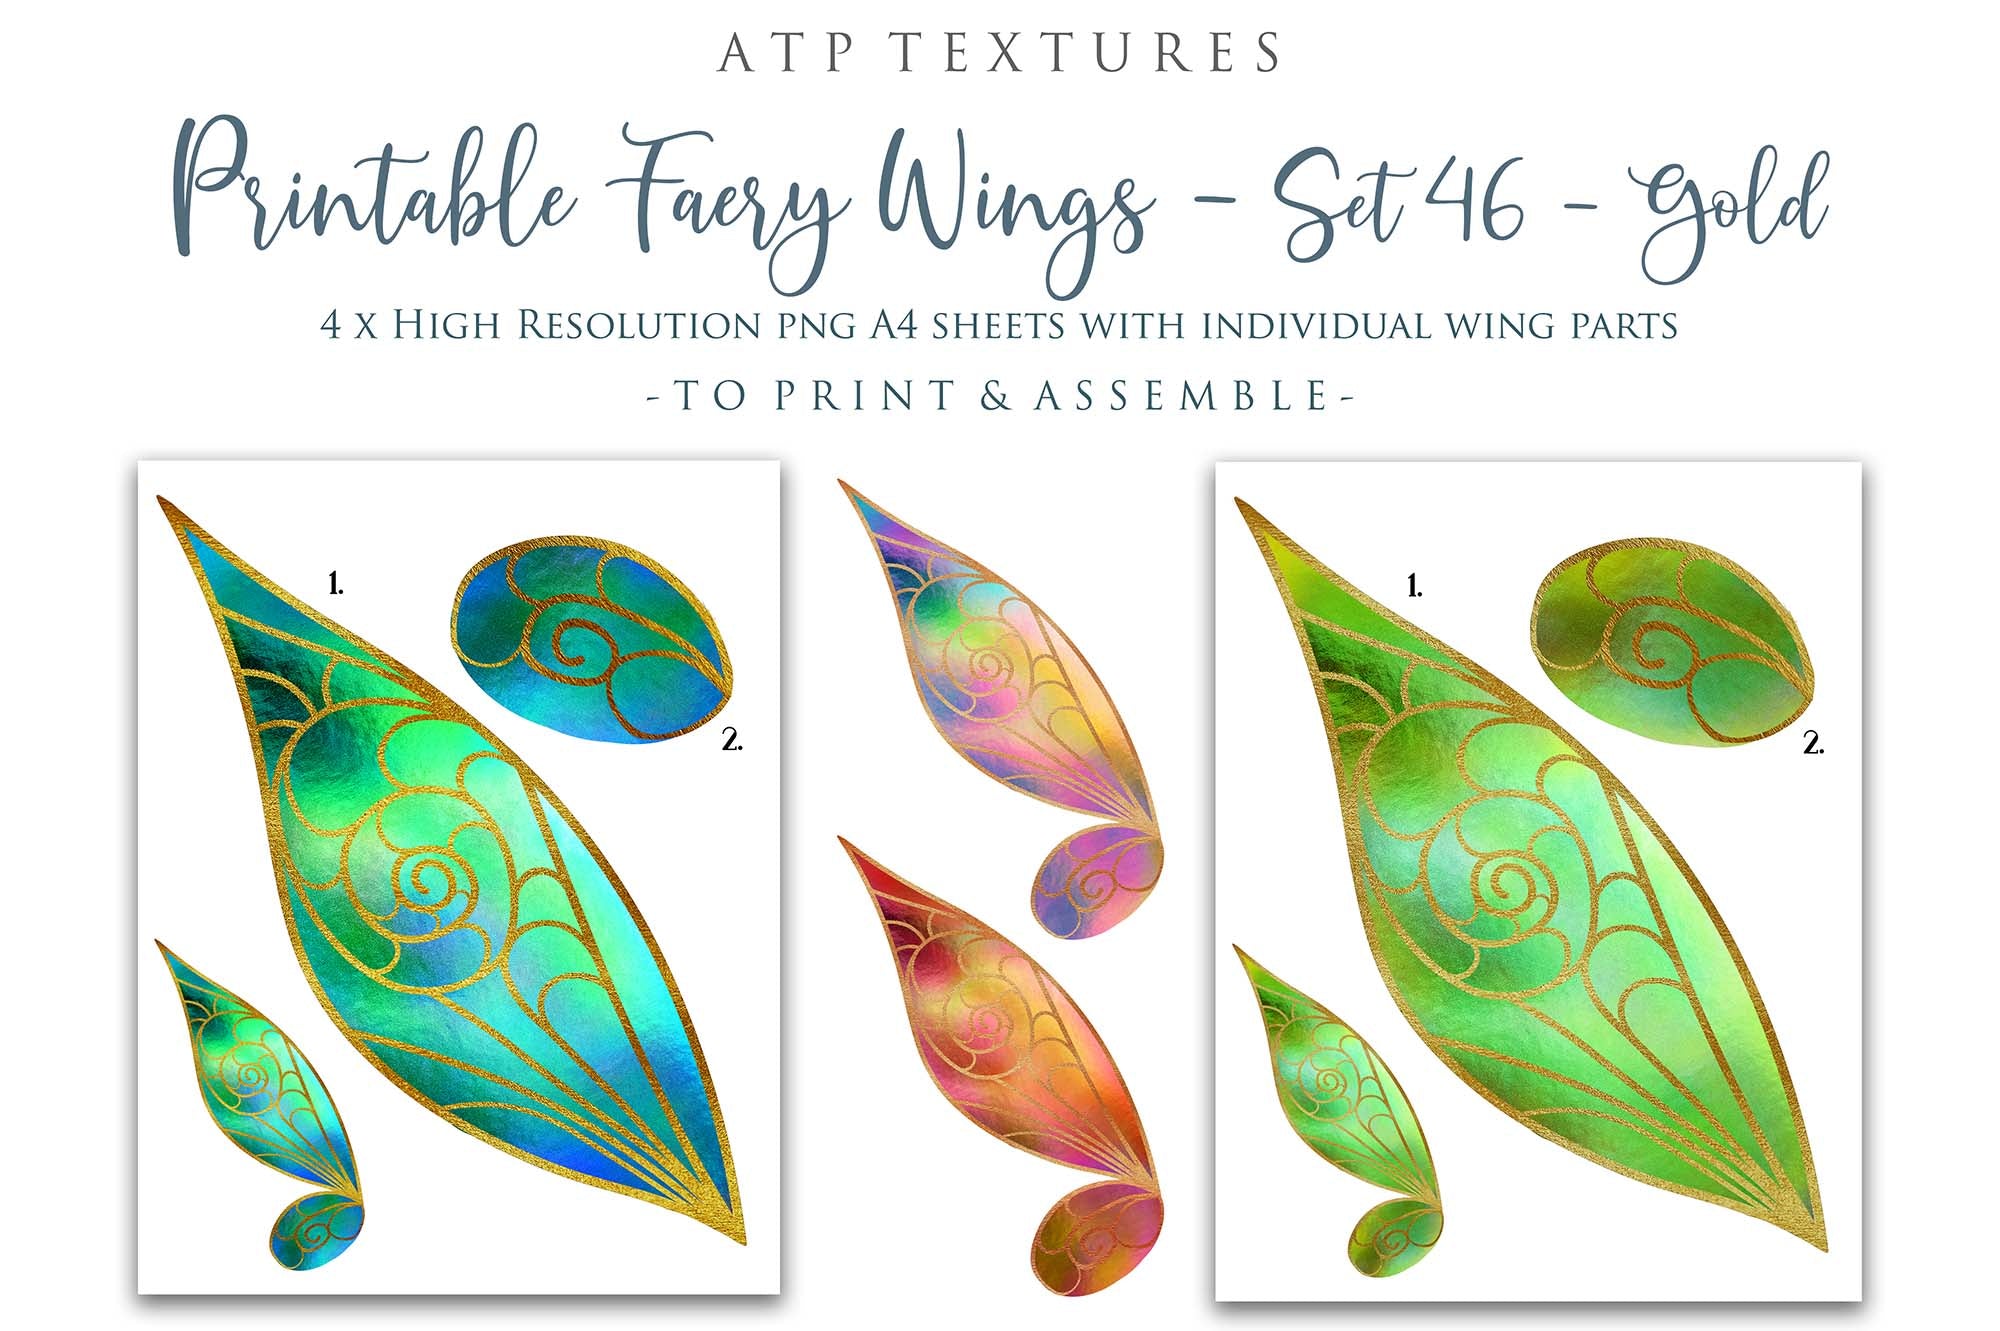 PRINTABLE FAIRY WINGS - Set 46 - GOLD